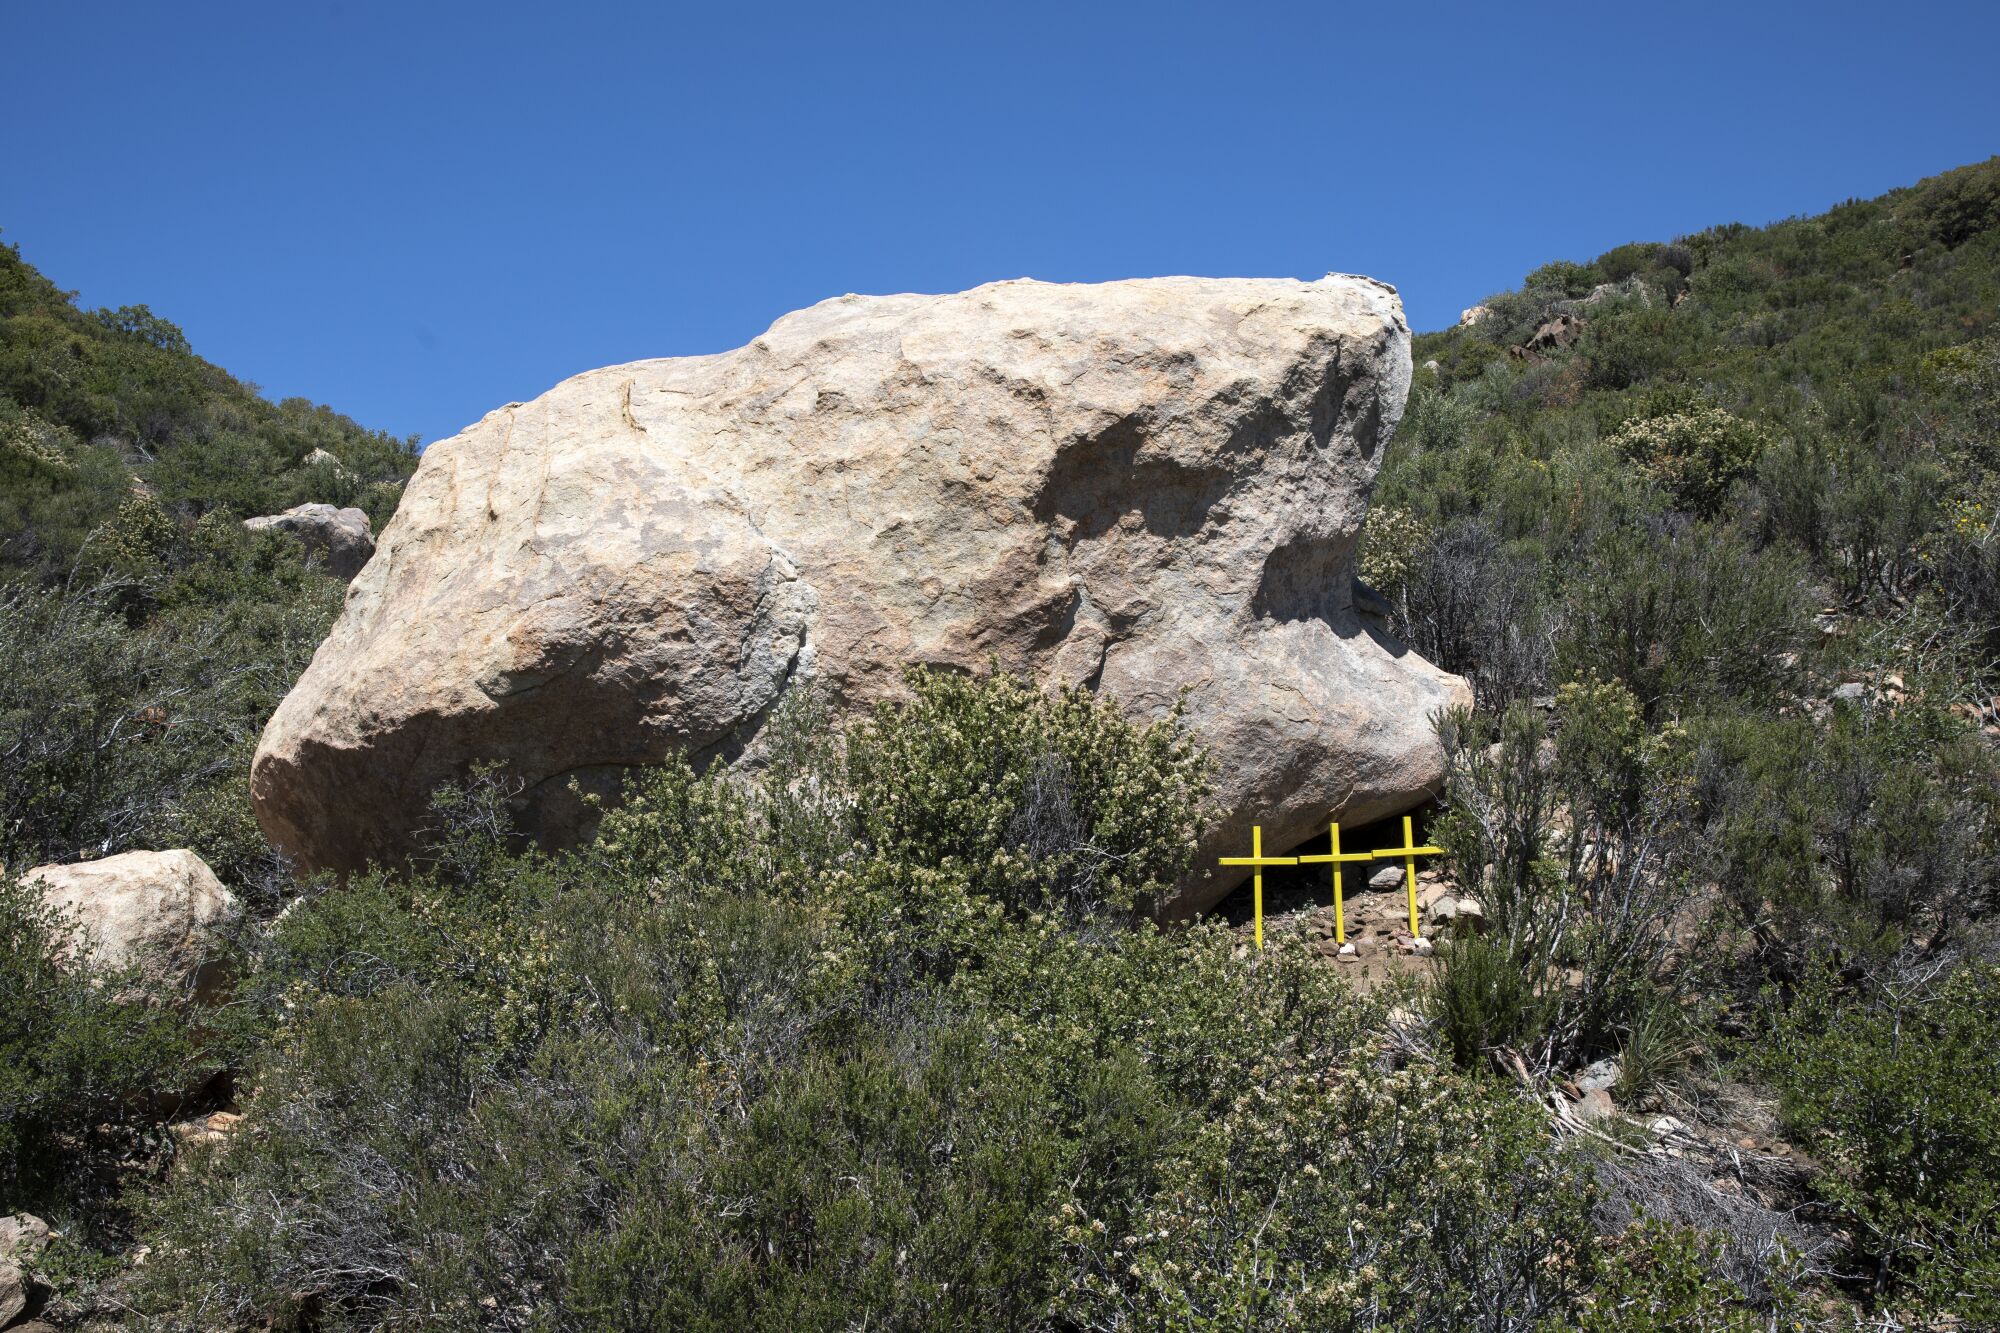 Three yellow crosses planted near the base of a large rock surrounded by shrubs.